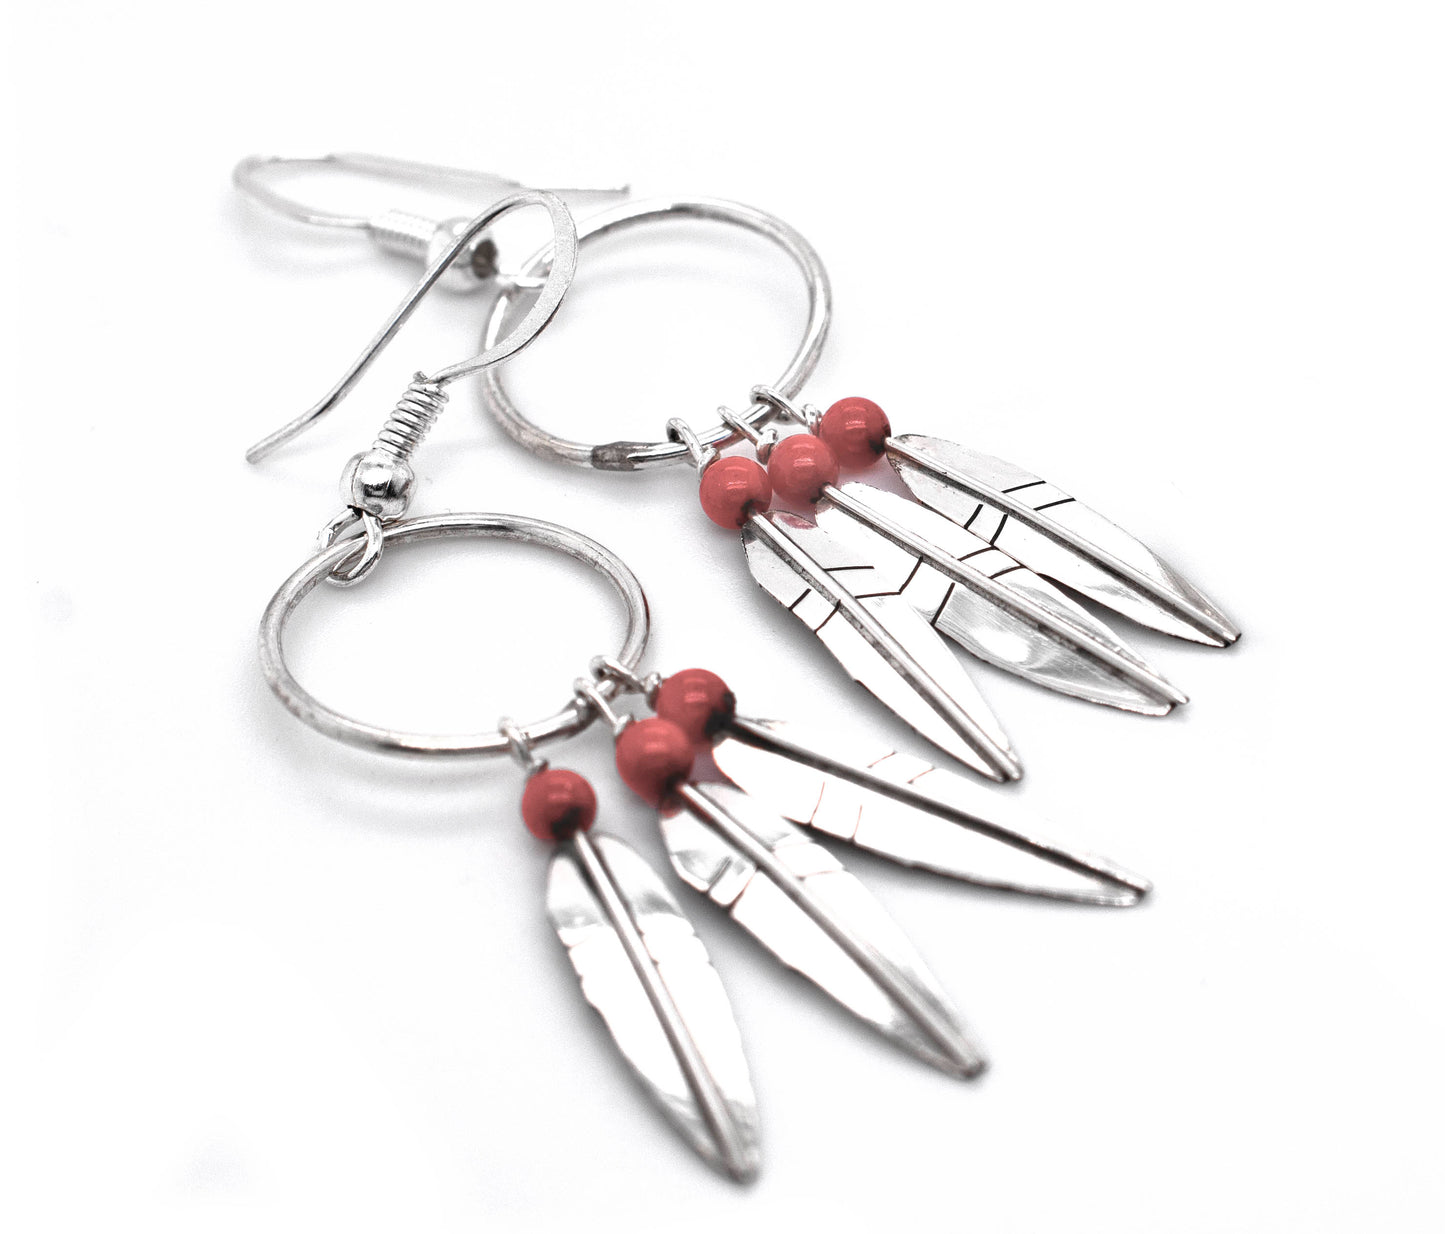 A pair of Enchanting Zuni Feather Earrings with Coral Or Turquoise Beads by Super Silver, perfect for adding a touch of southwest flair to any outfit.